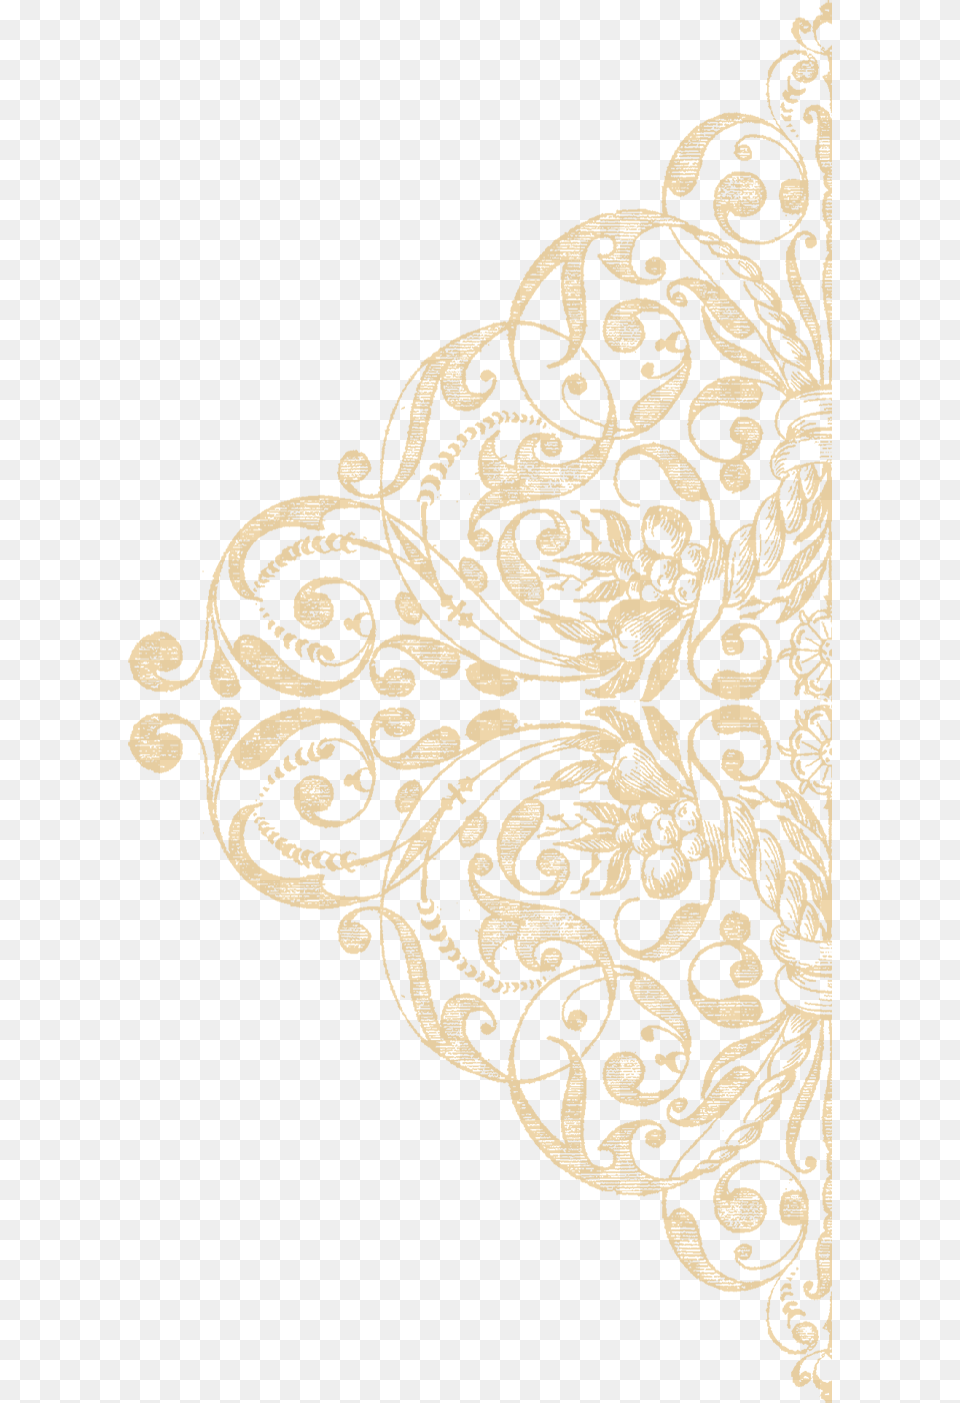 Lace Gold Pattern Ornament Mapping Texture Clipart Transparent Background Texture Pattern Png